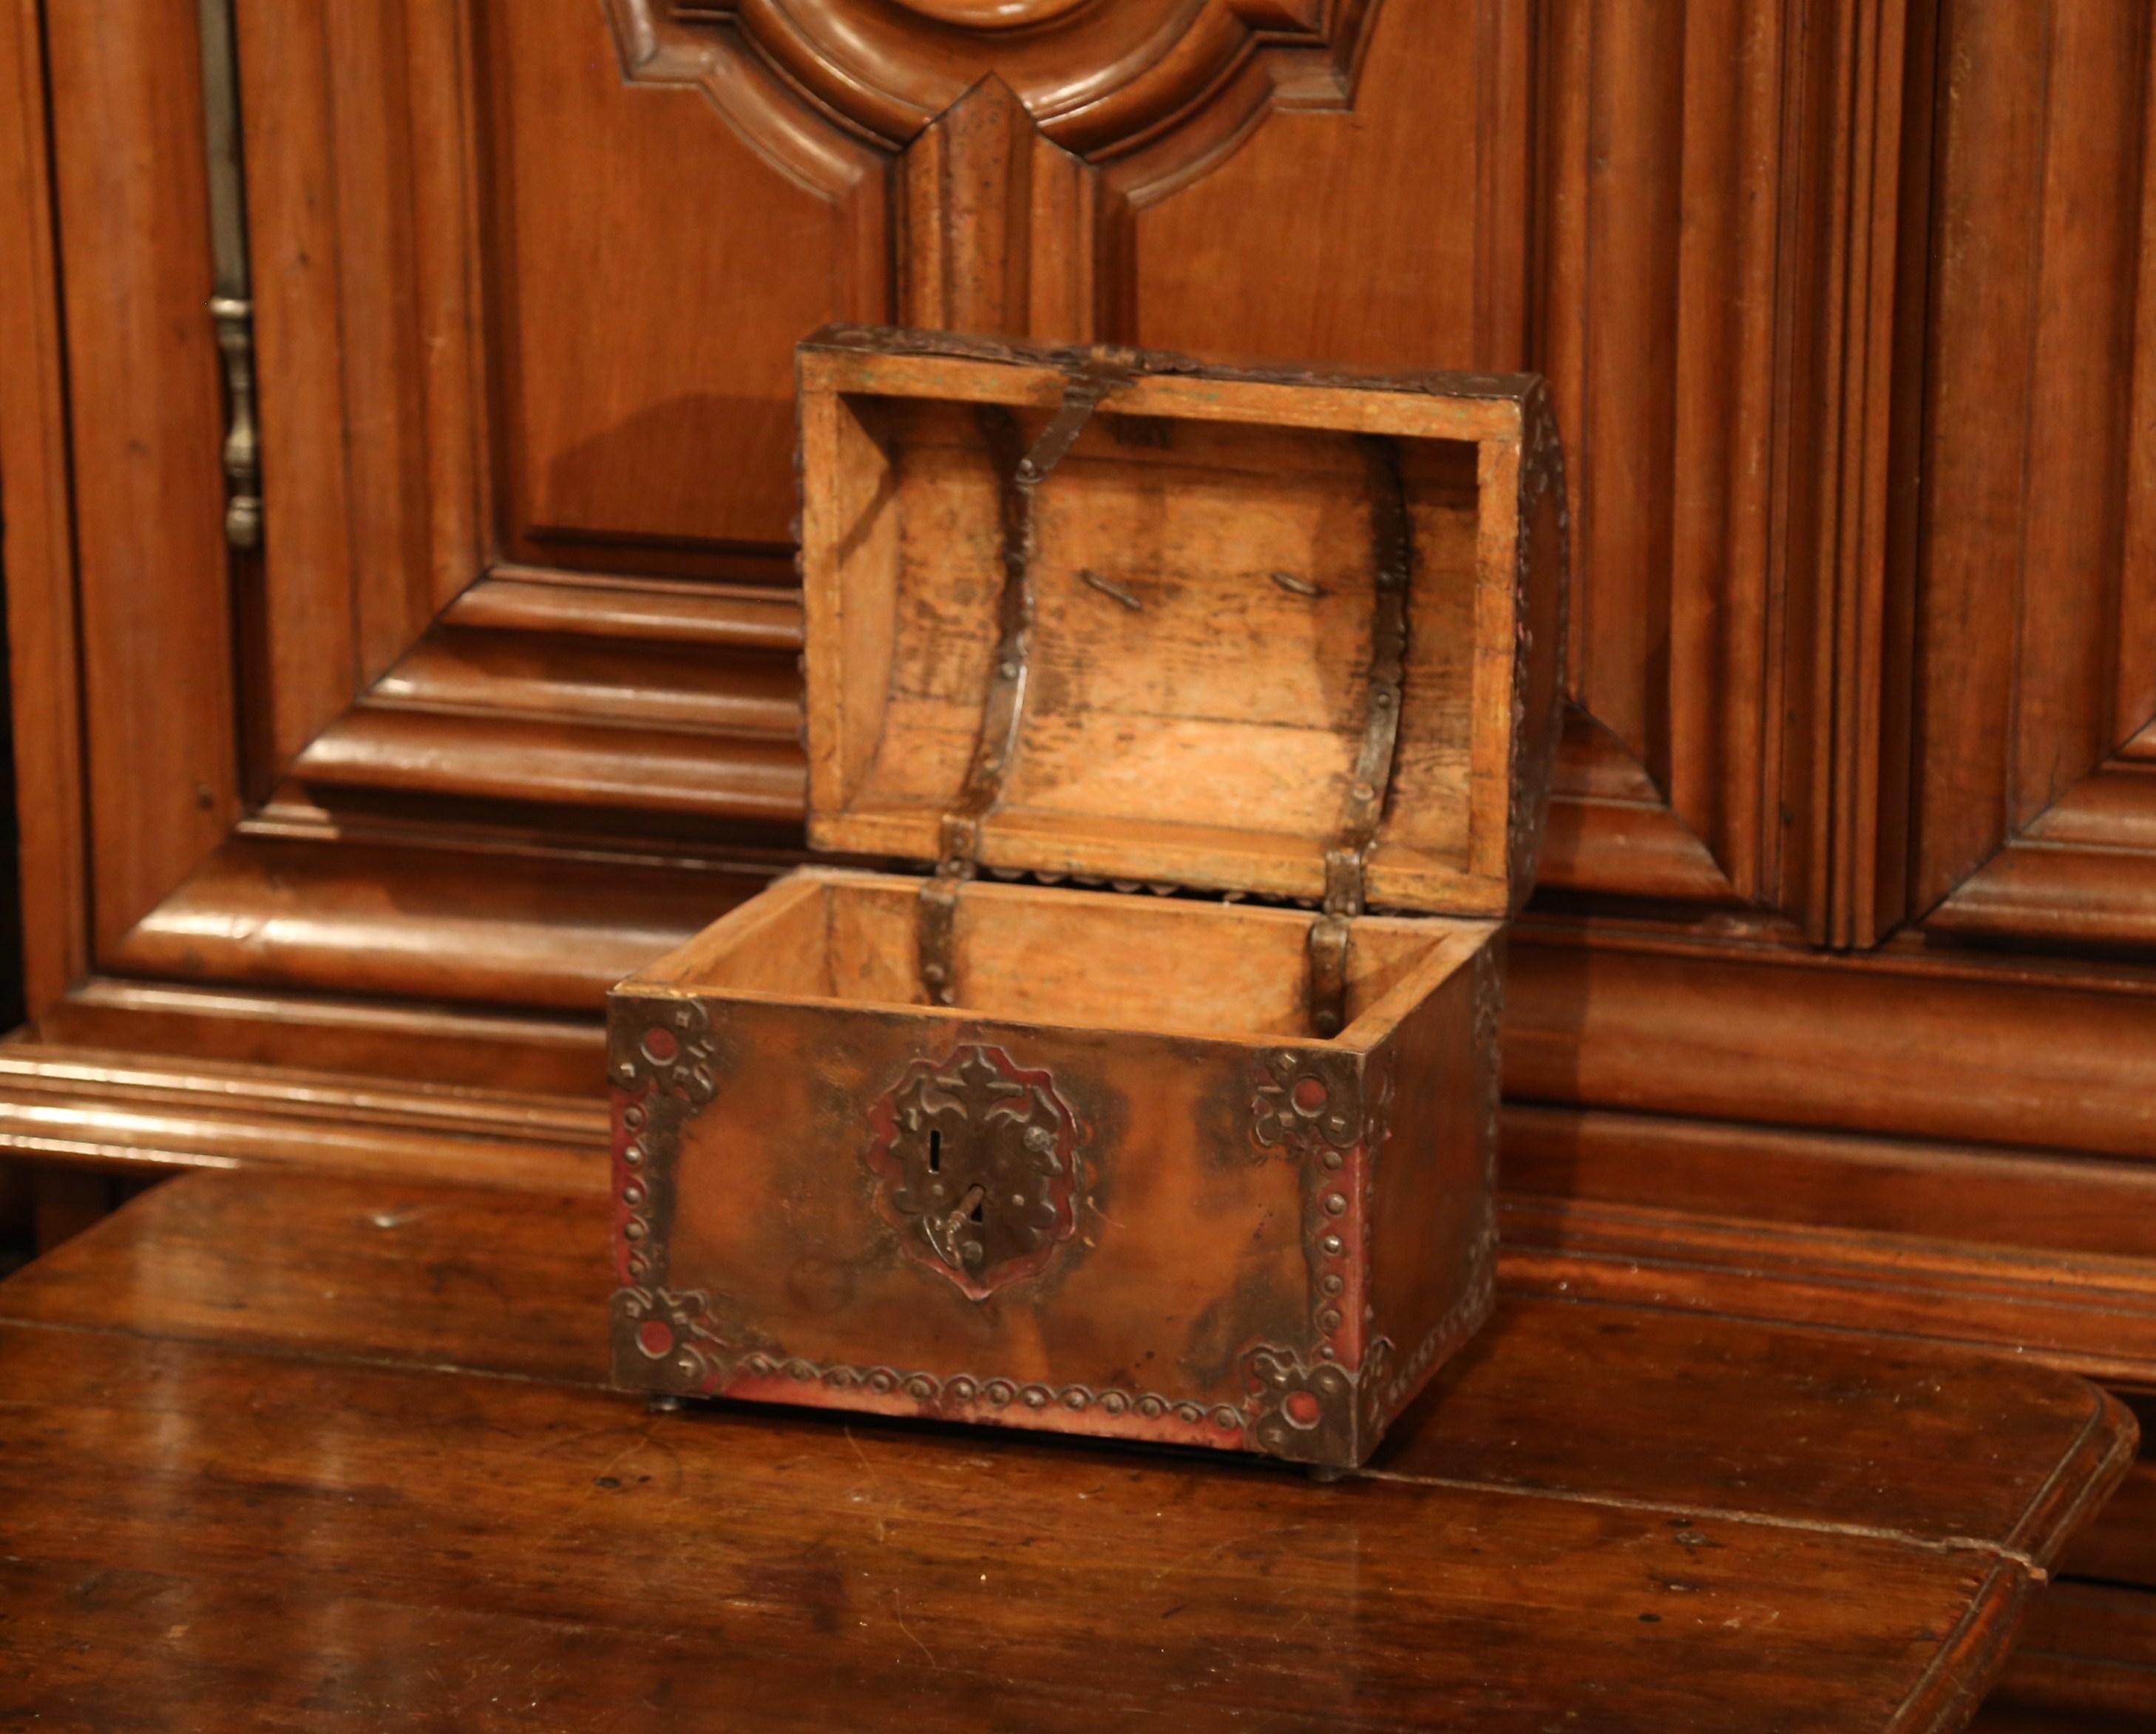 This beautifully crafted, antique trunk was crafted in Southern France, circa 1780. The brown leather box is shaped like a Classic storage trunk with an arched top and a rectangular front and back. The box is finished on all sides with rustic